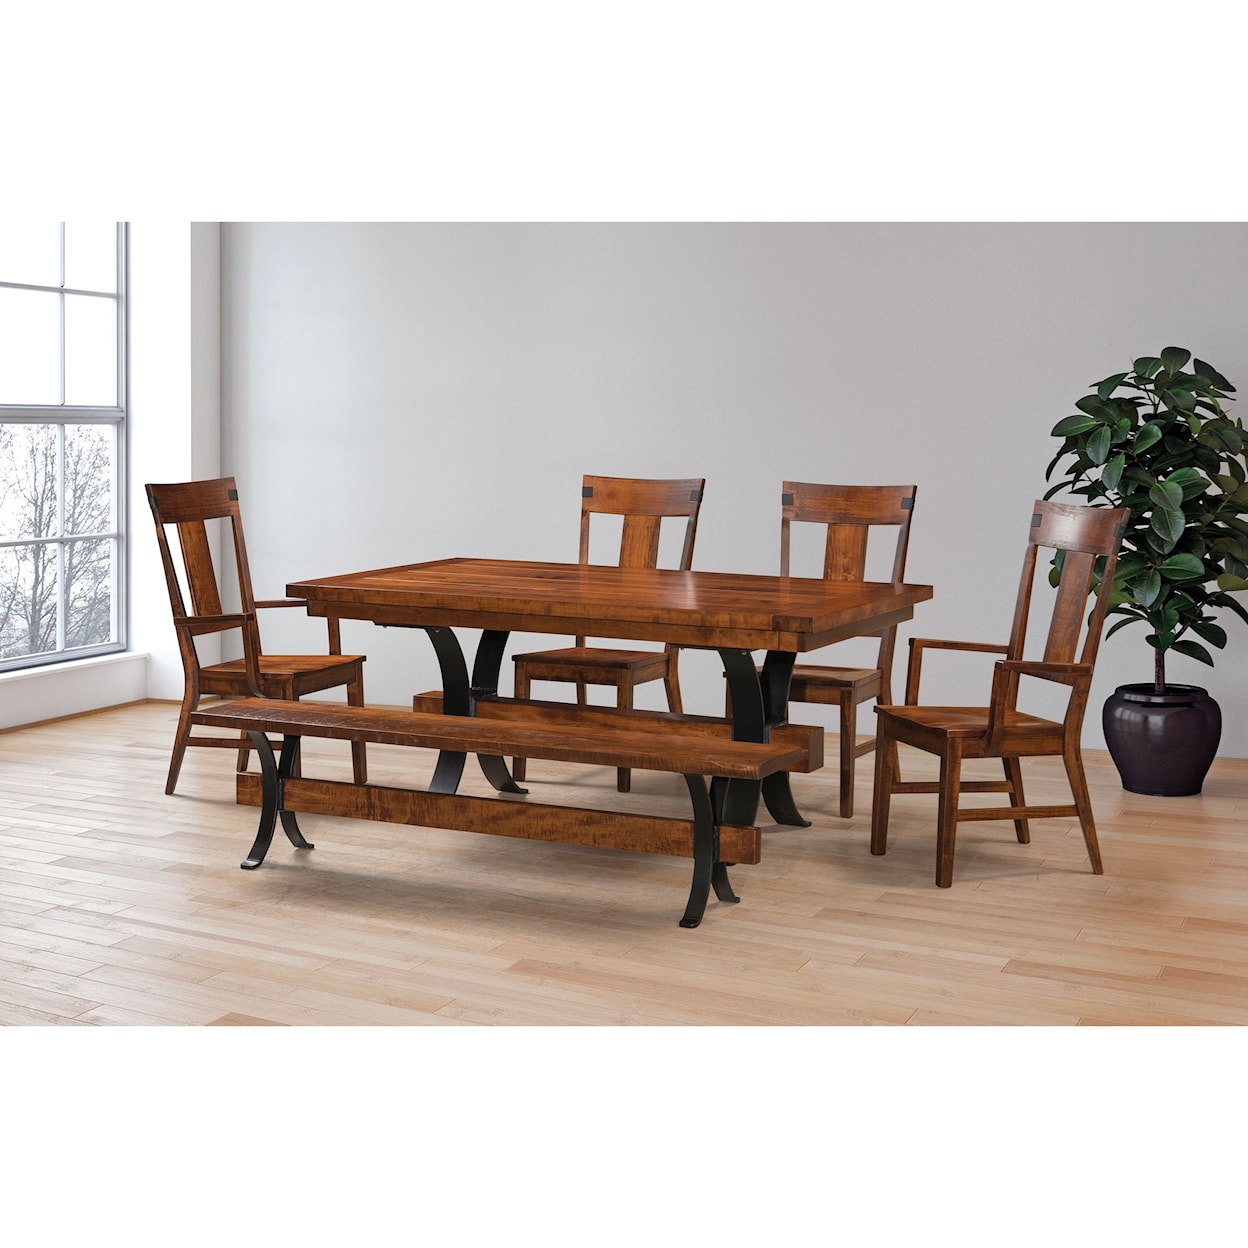 Weaver Woodcraft Williamsburg Customizable Table & Chair Set w/ Bench